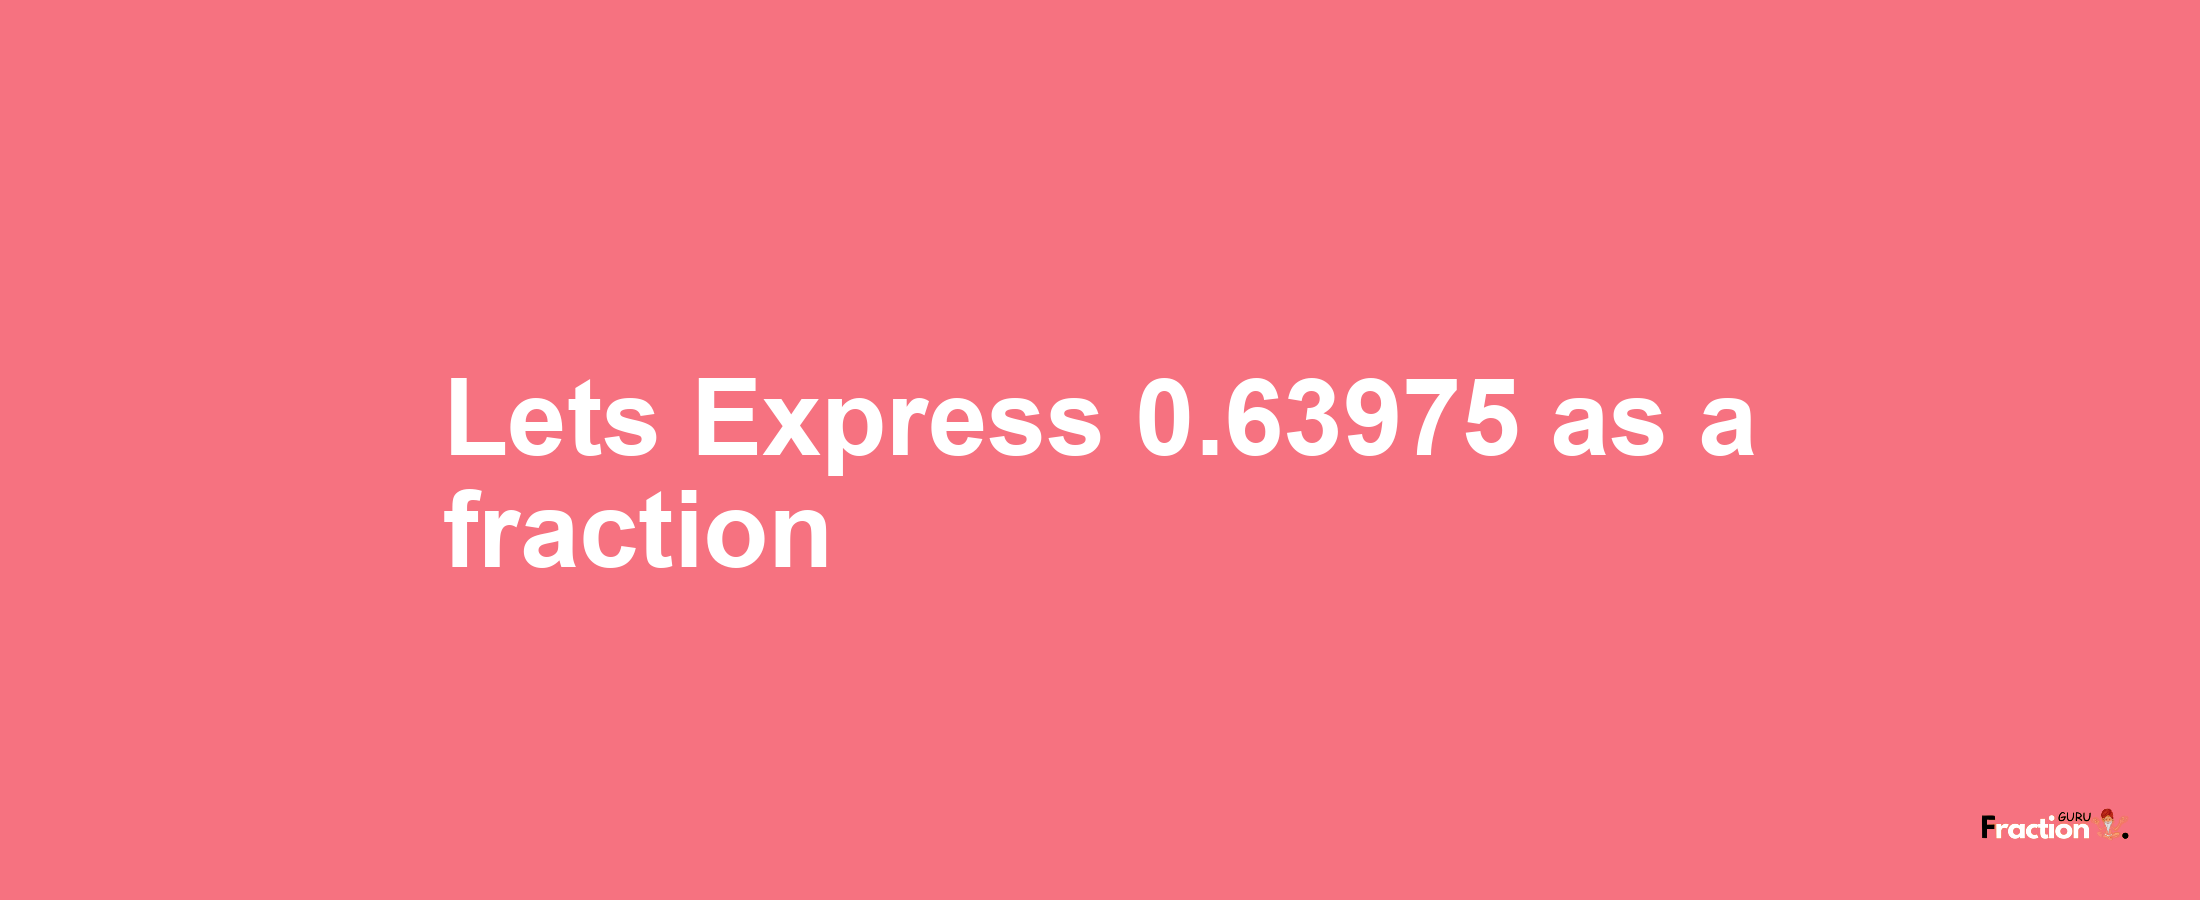 Lets Express 0.63975 as afraction